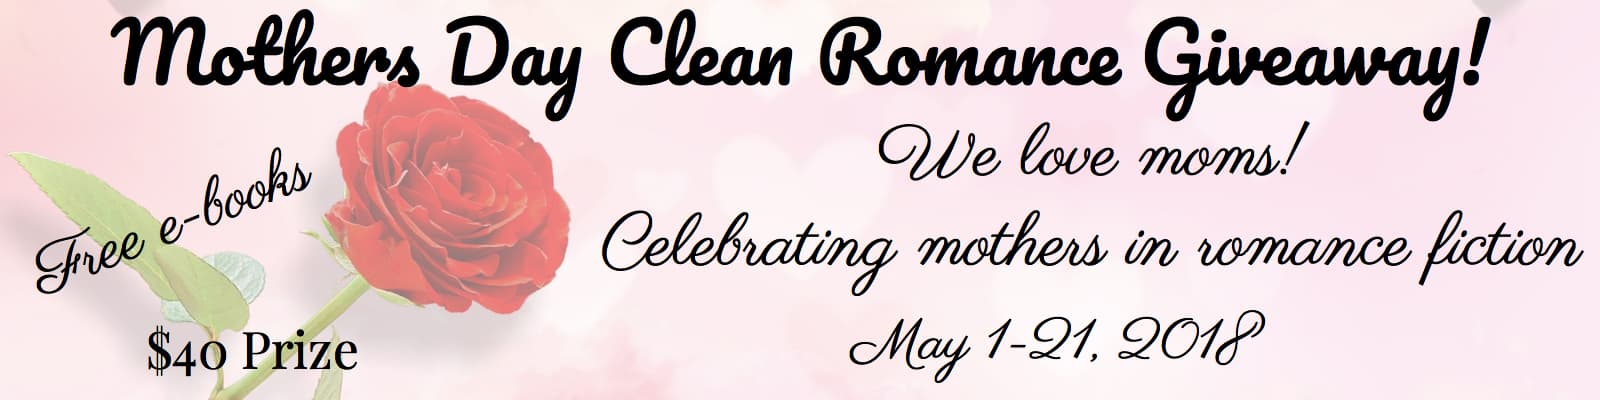 Celebrating Mothers in Romance Fiction